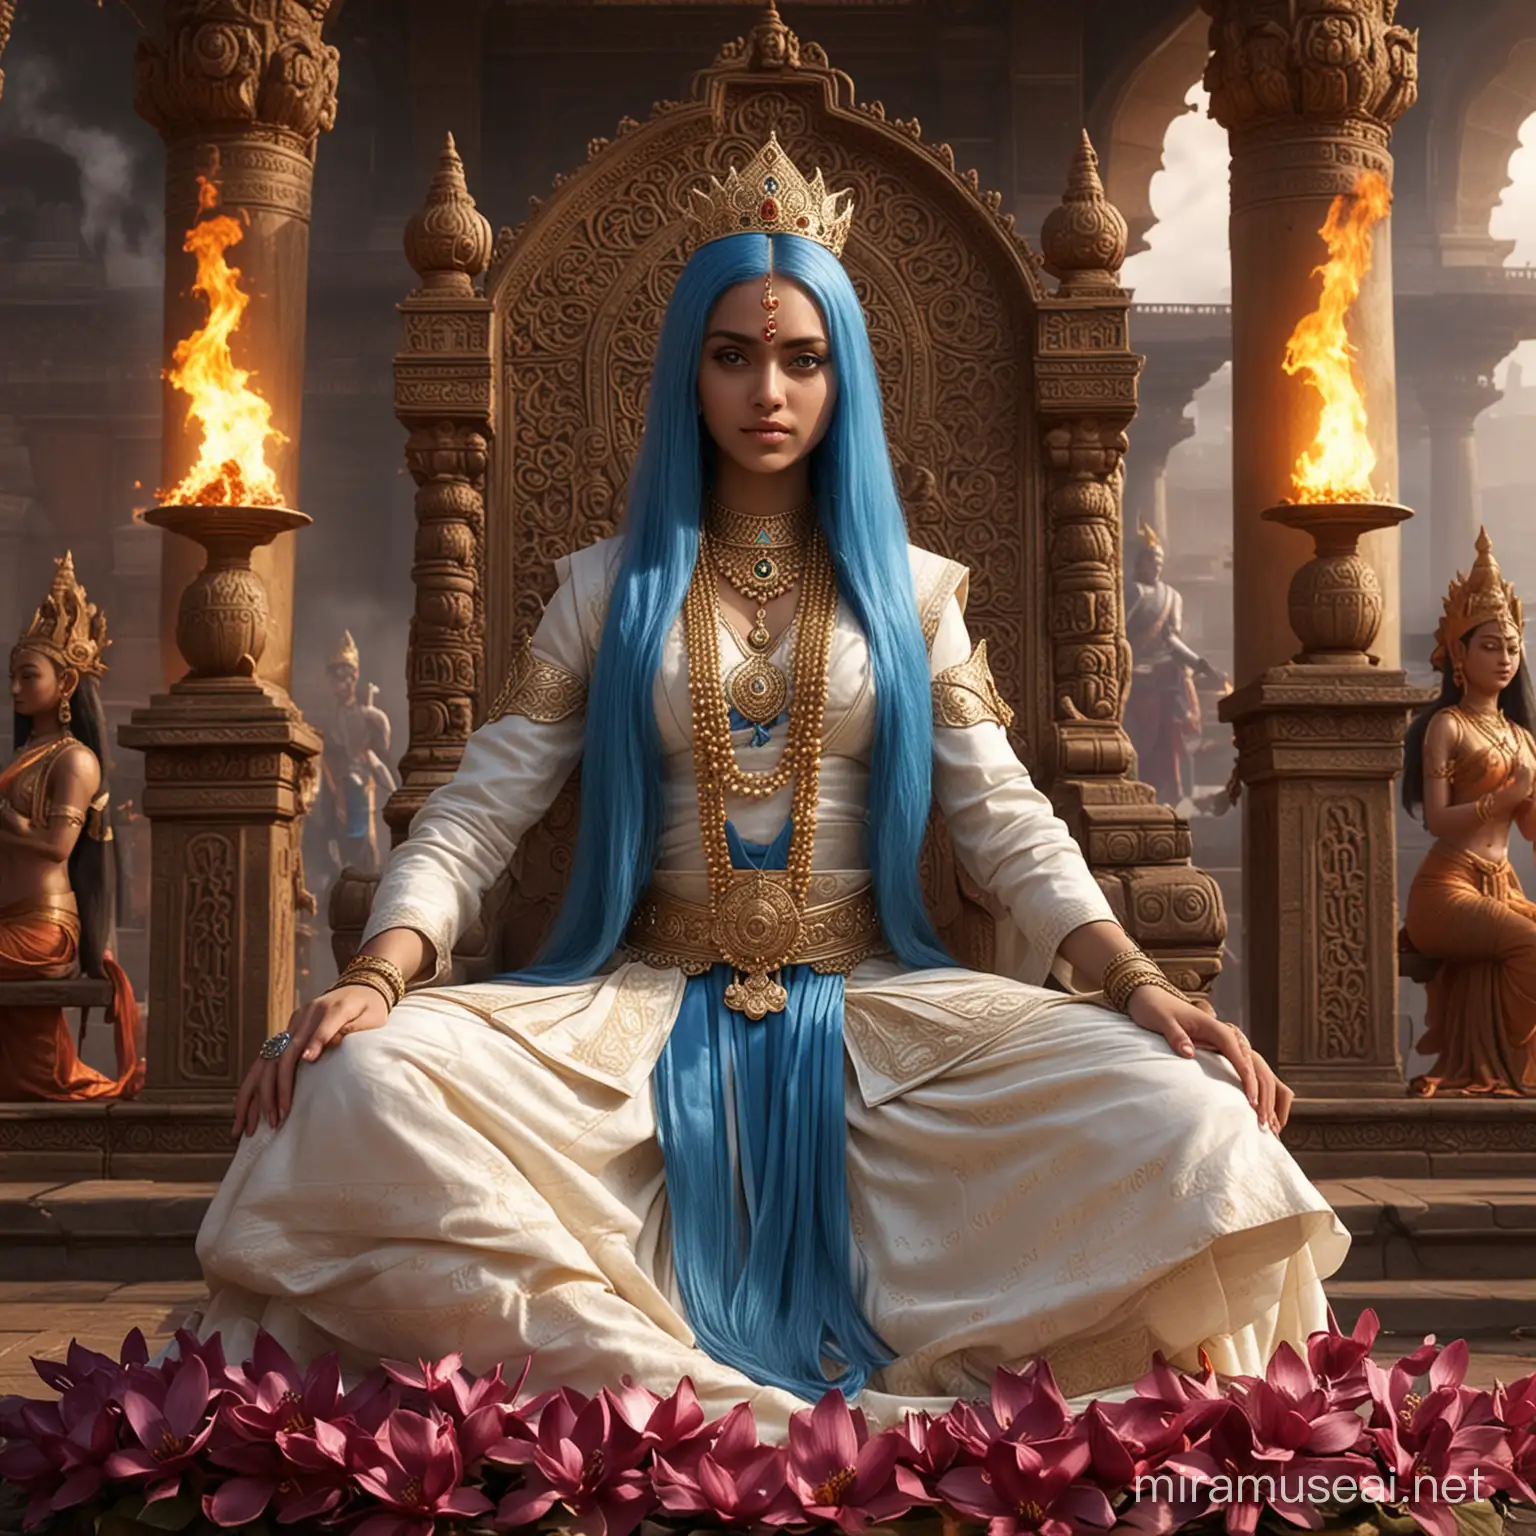 Majestic Hindu Empress Goddess Surrounded by Demonic Deities and Flames